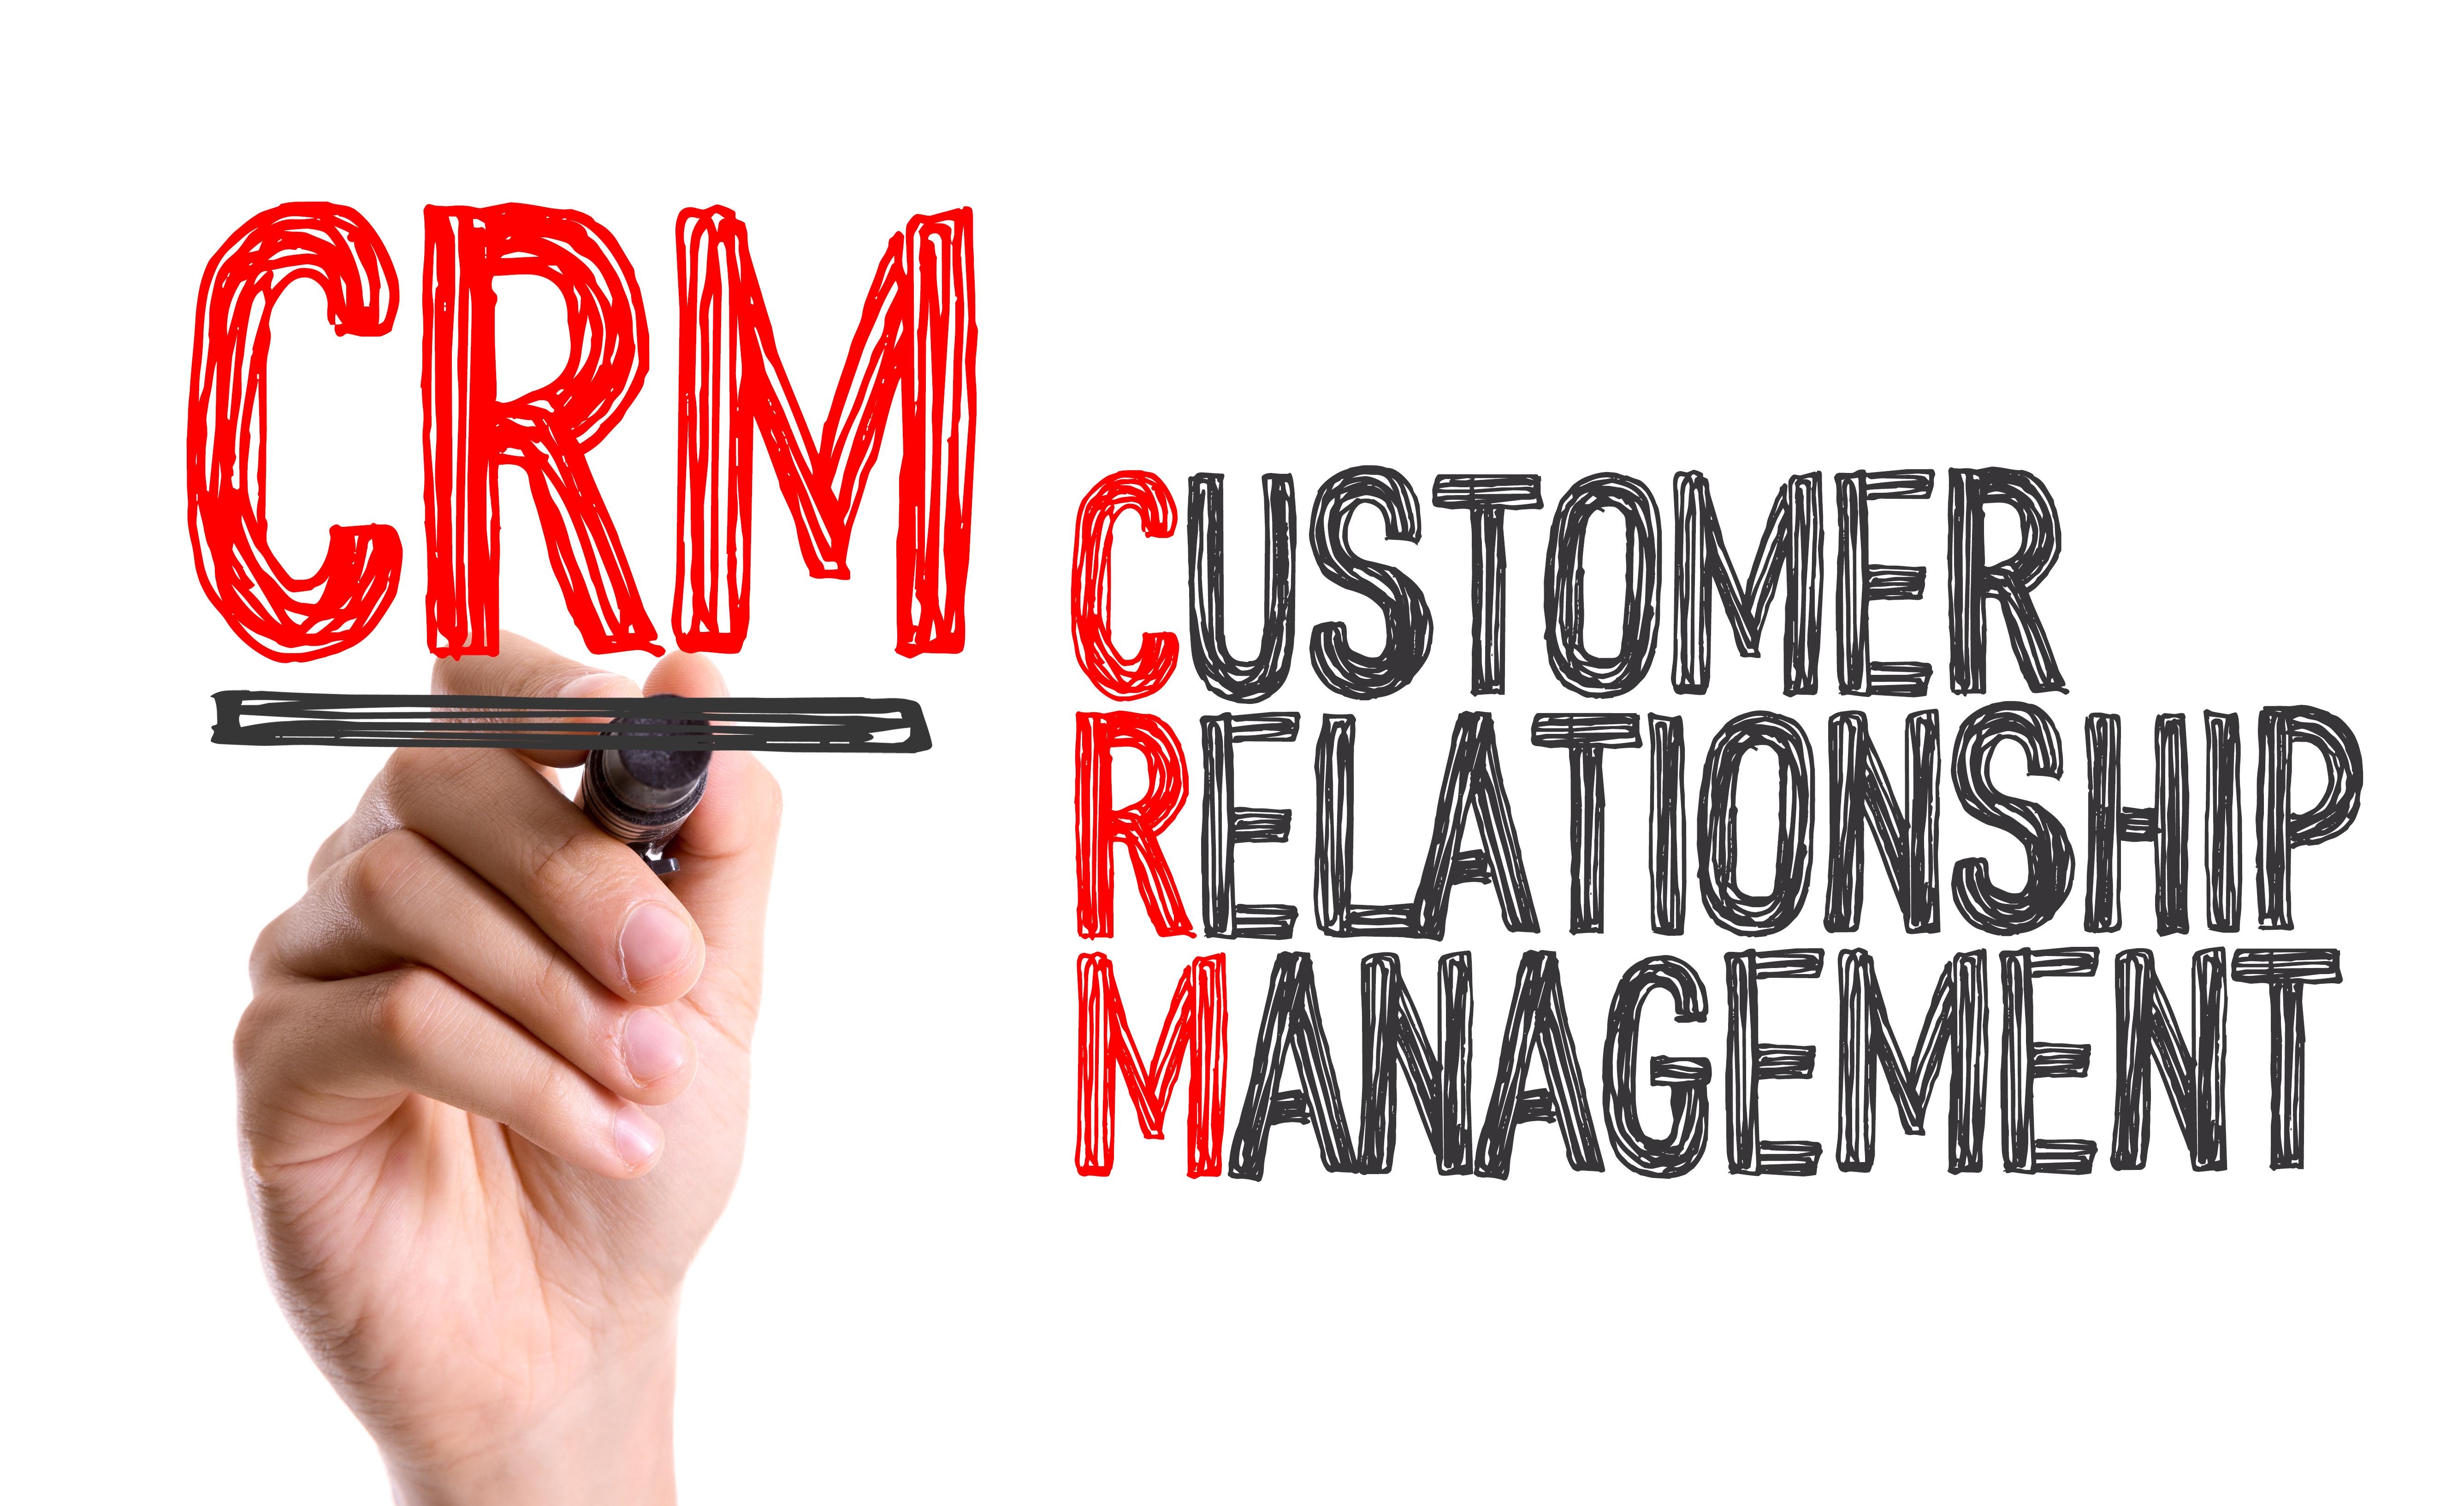 Hand with marker writing: CRM